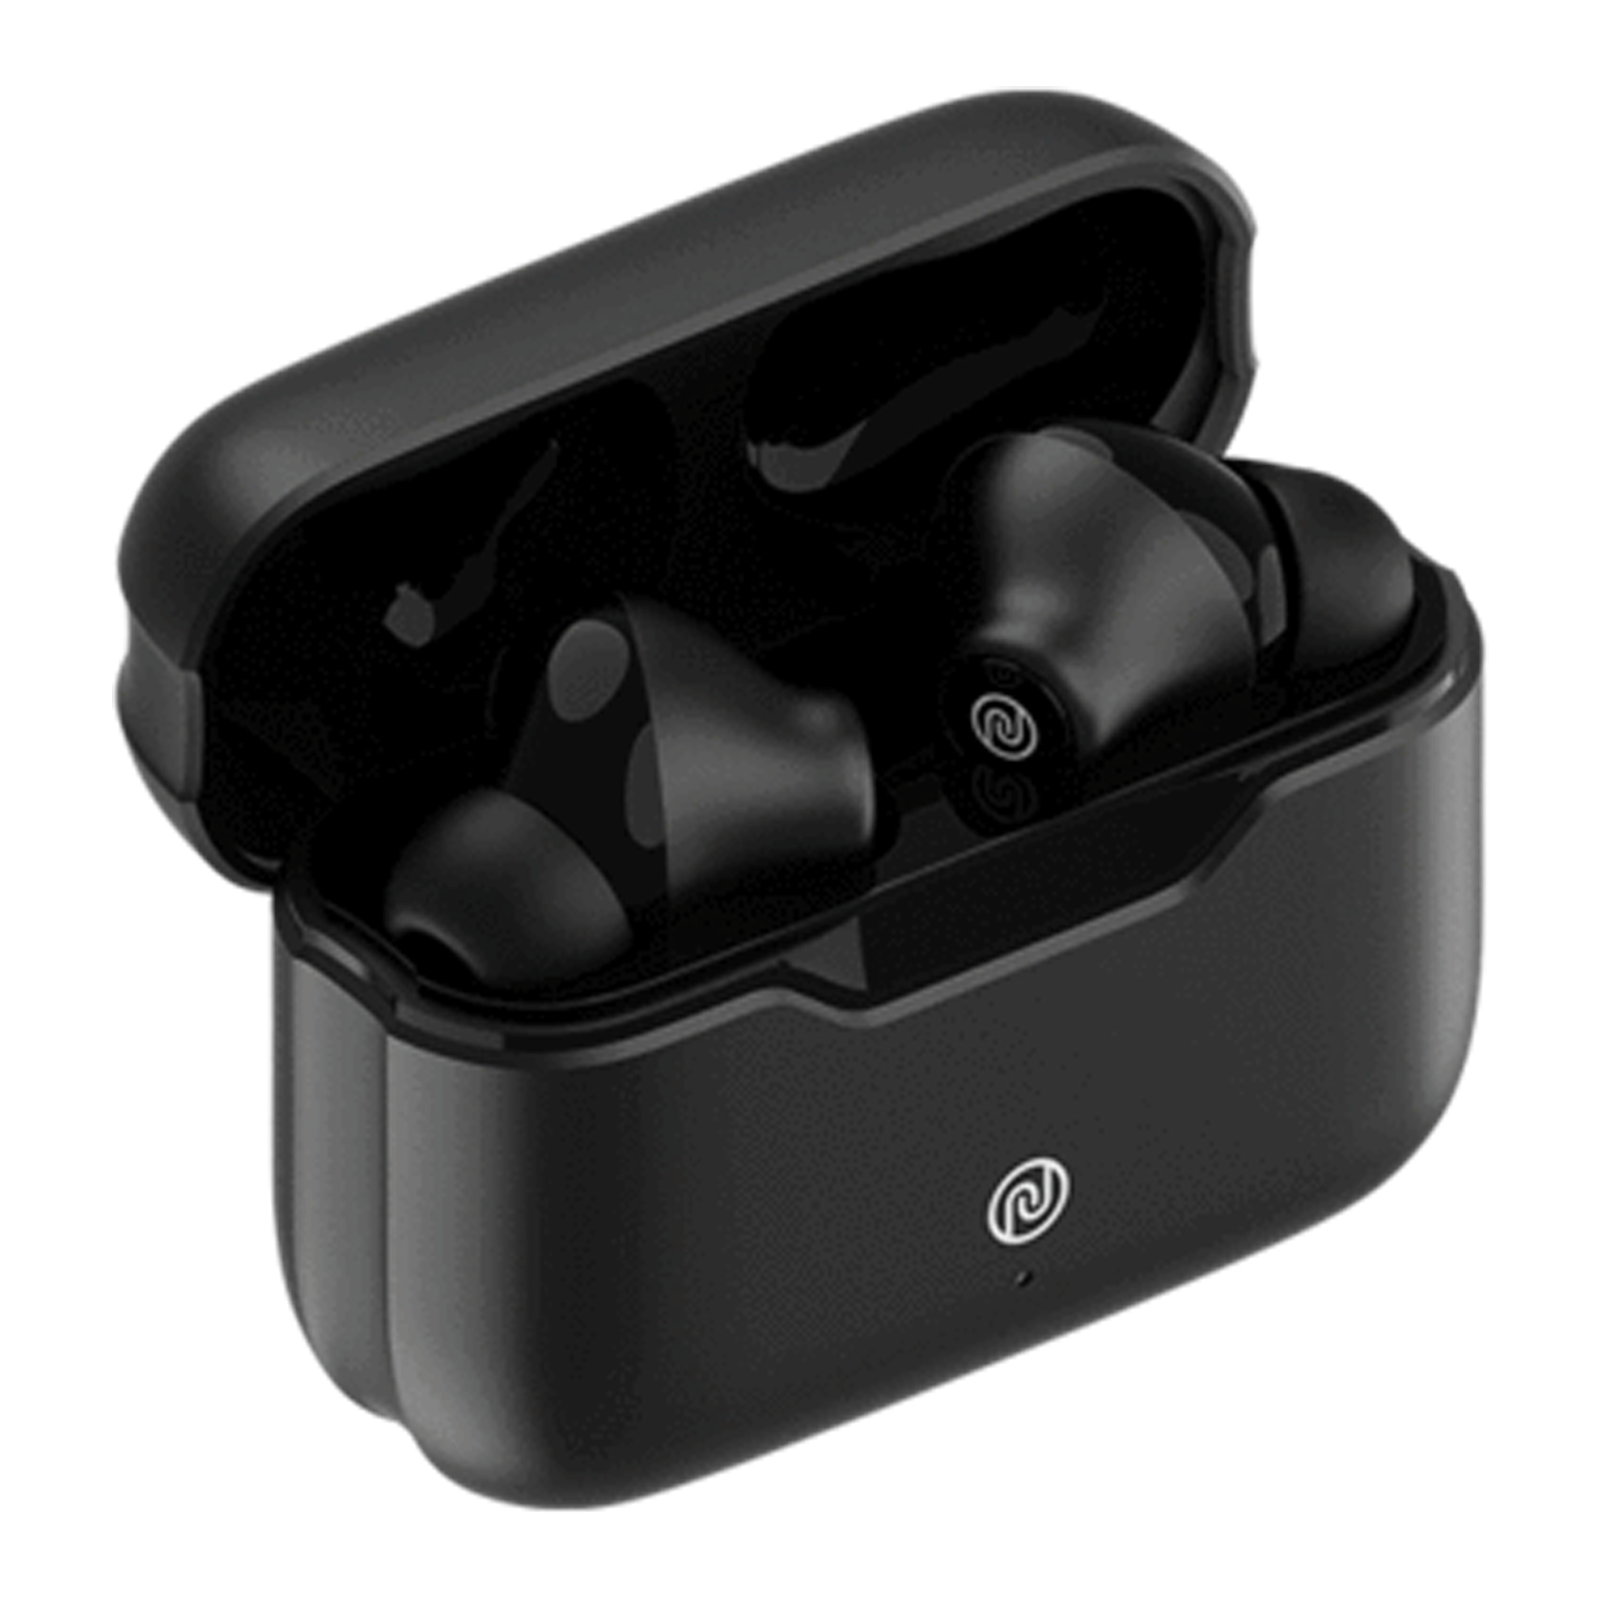 Noise Buds VS103 AUD-HDPHN-BUDSVS10 In-Ear Truly Wireless Earbuds with Mic (Bluetooth 5.0, Hyper Sync Technology, Jet Black)_4